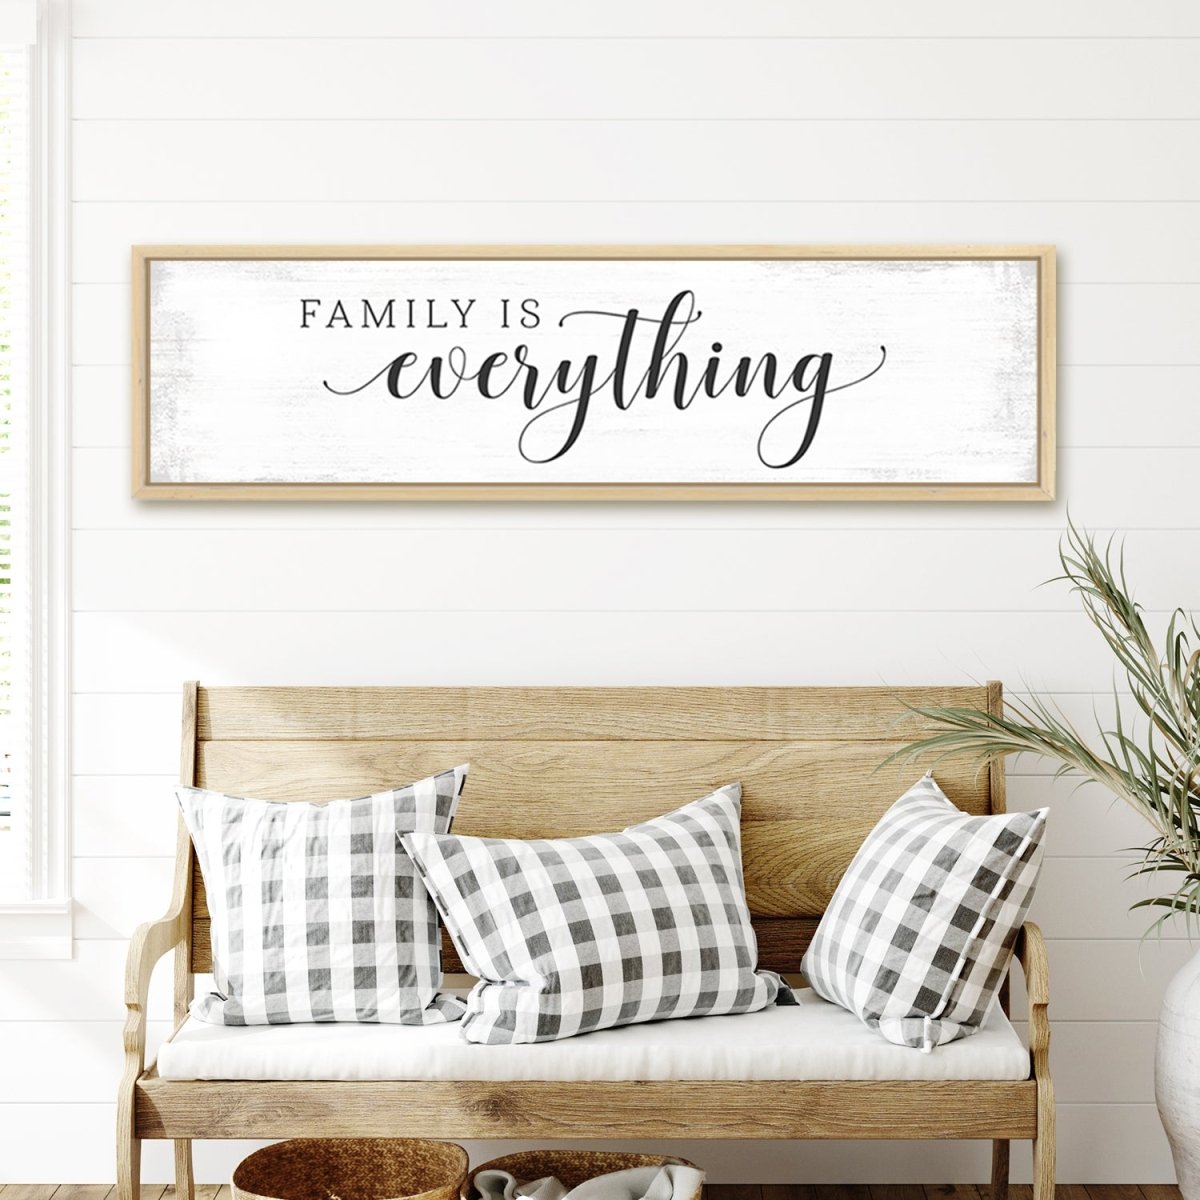 Family Is Everything Canvas Sign in Entryway of Home - Pretty Perfect Studio